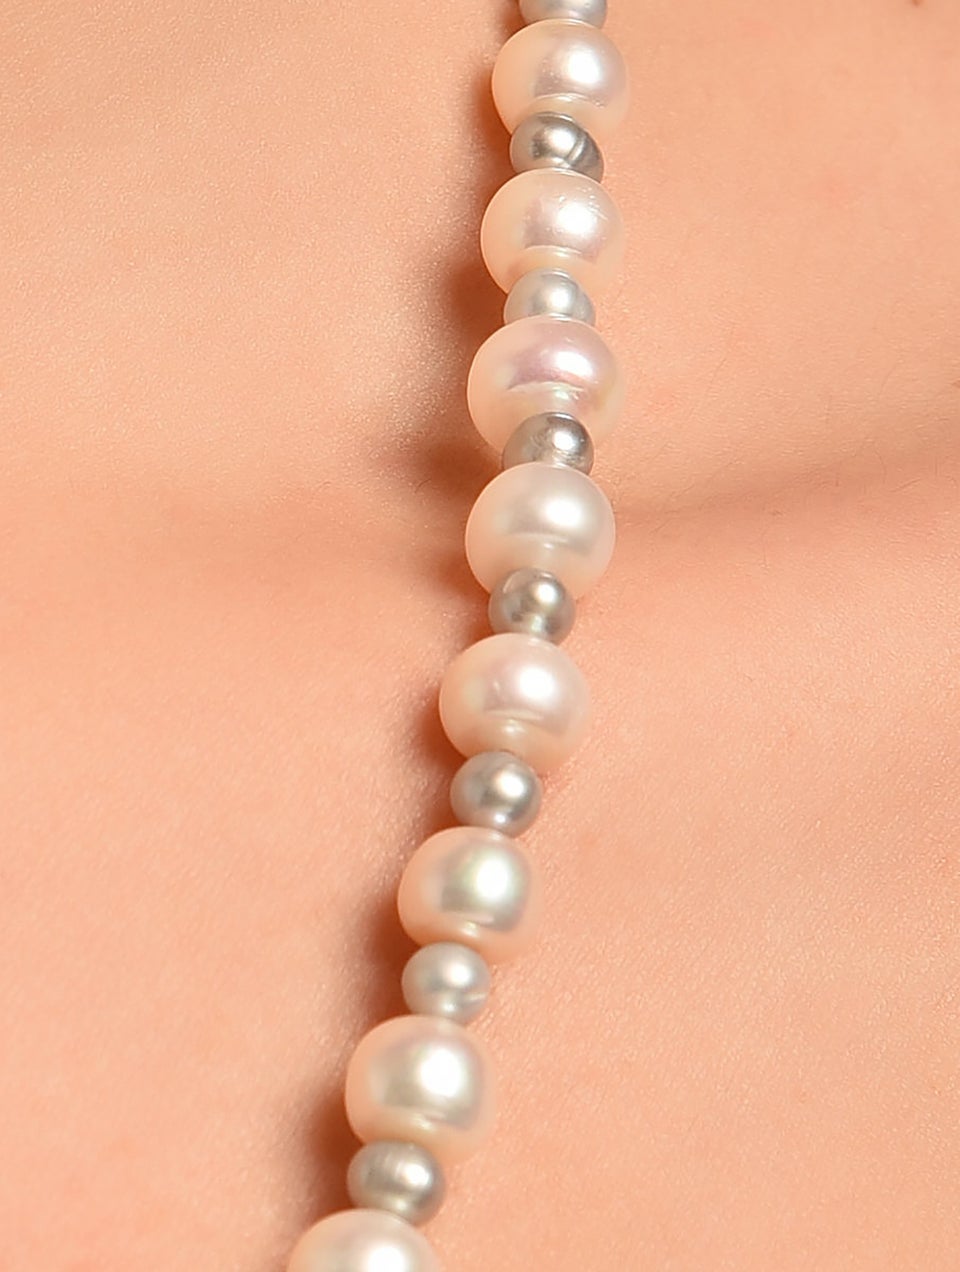 Women Freshwater Pearls Necklace